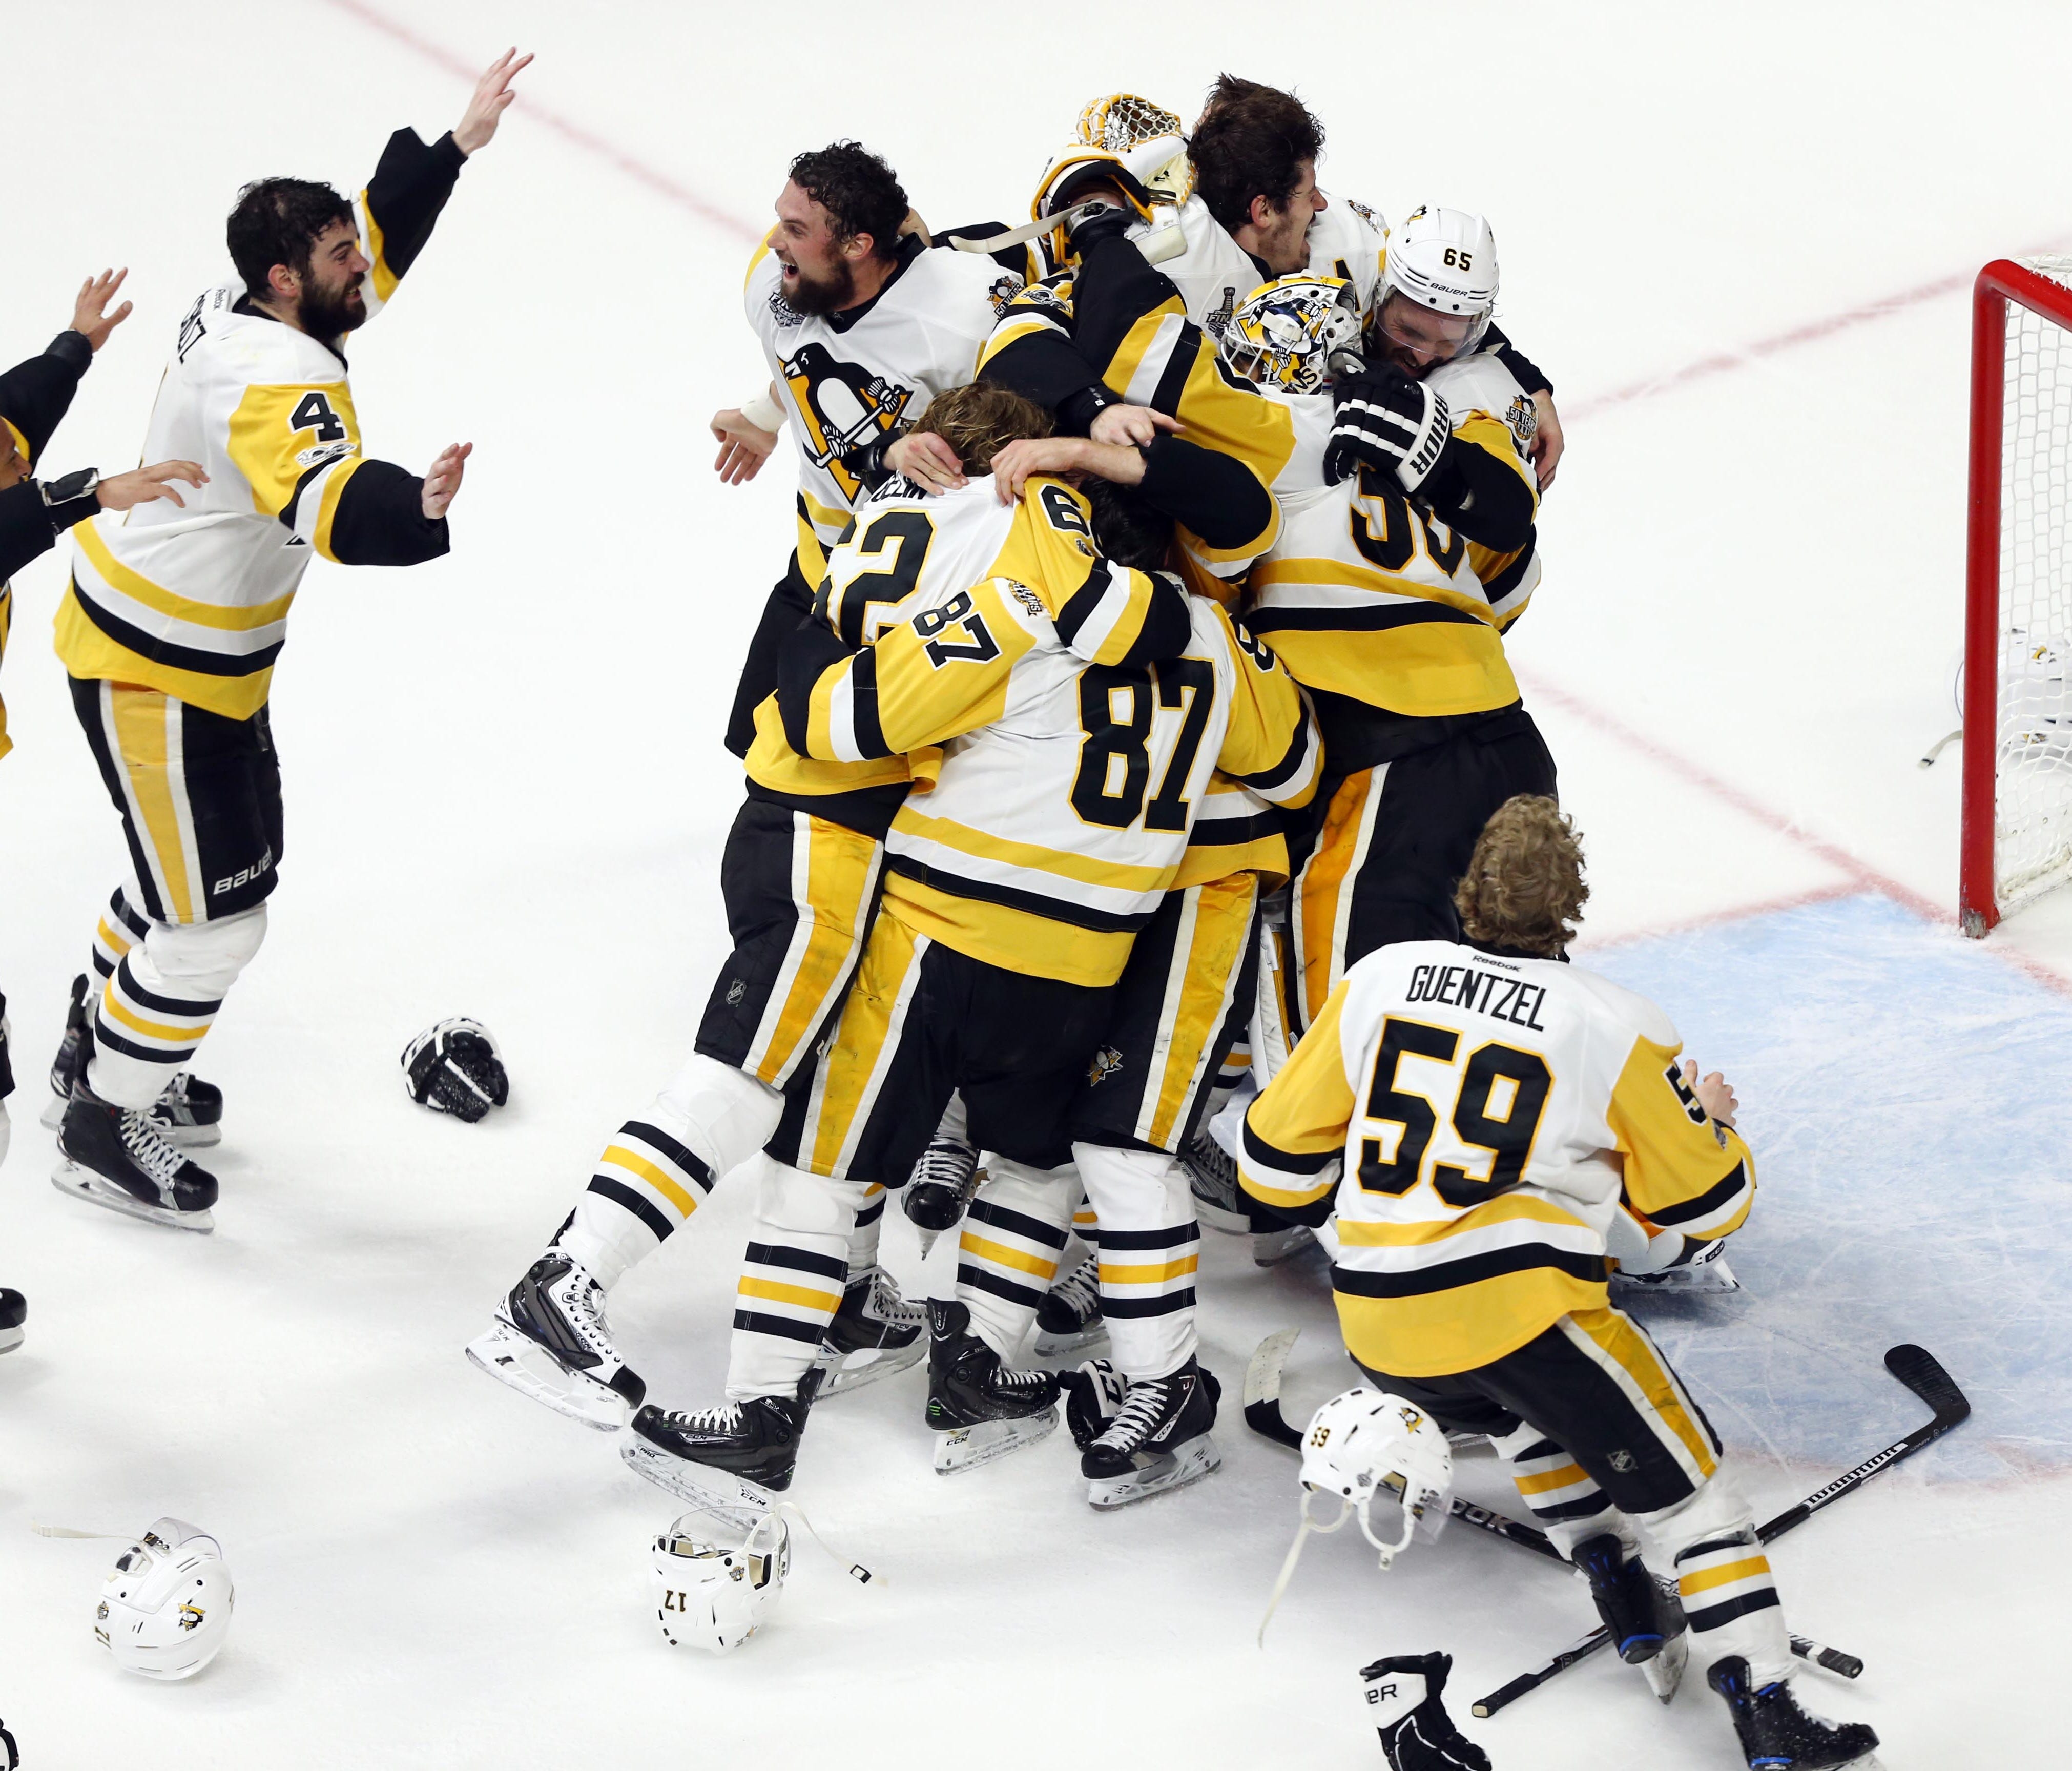 Pittsburgh Penguins players celebrate on the ice after defeating the Nashville Predators in Game 6 to clinch back-to-back Stanley Cup titles.